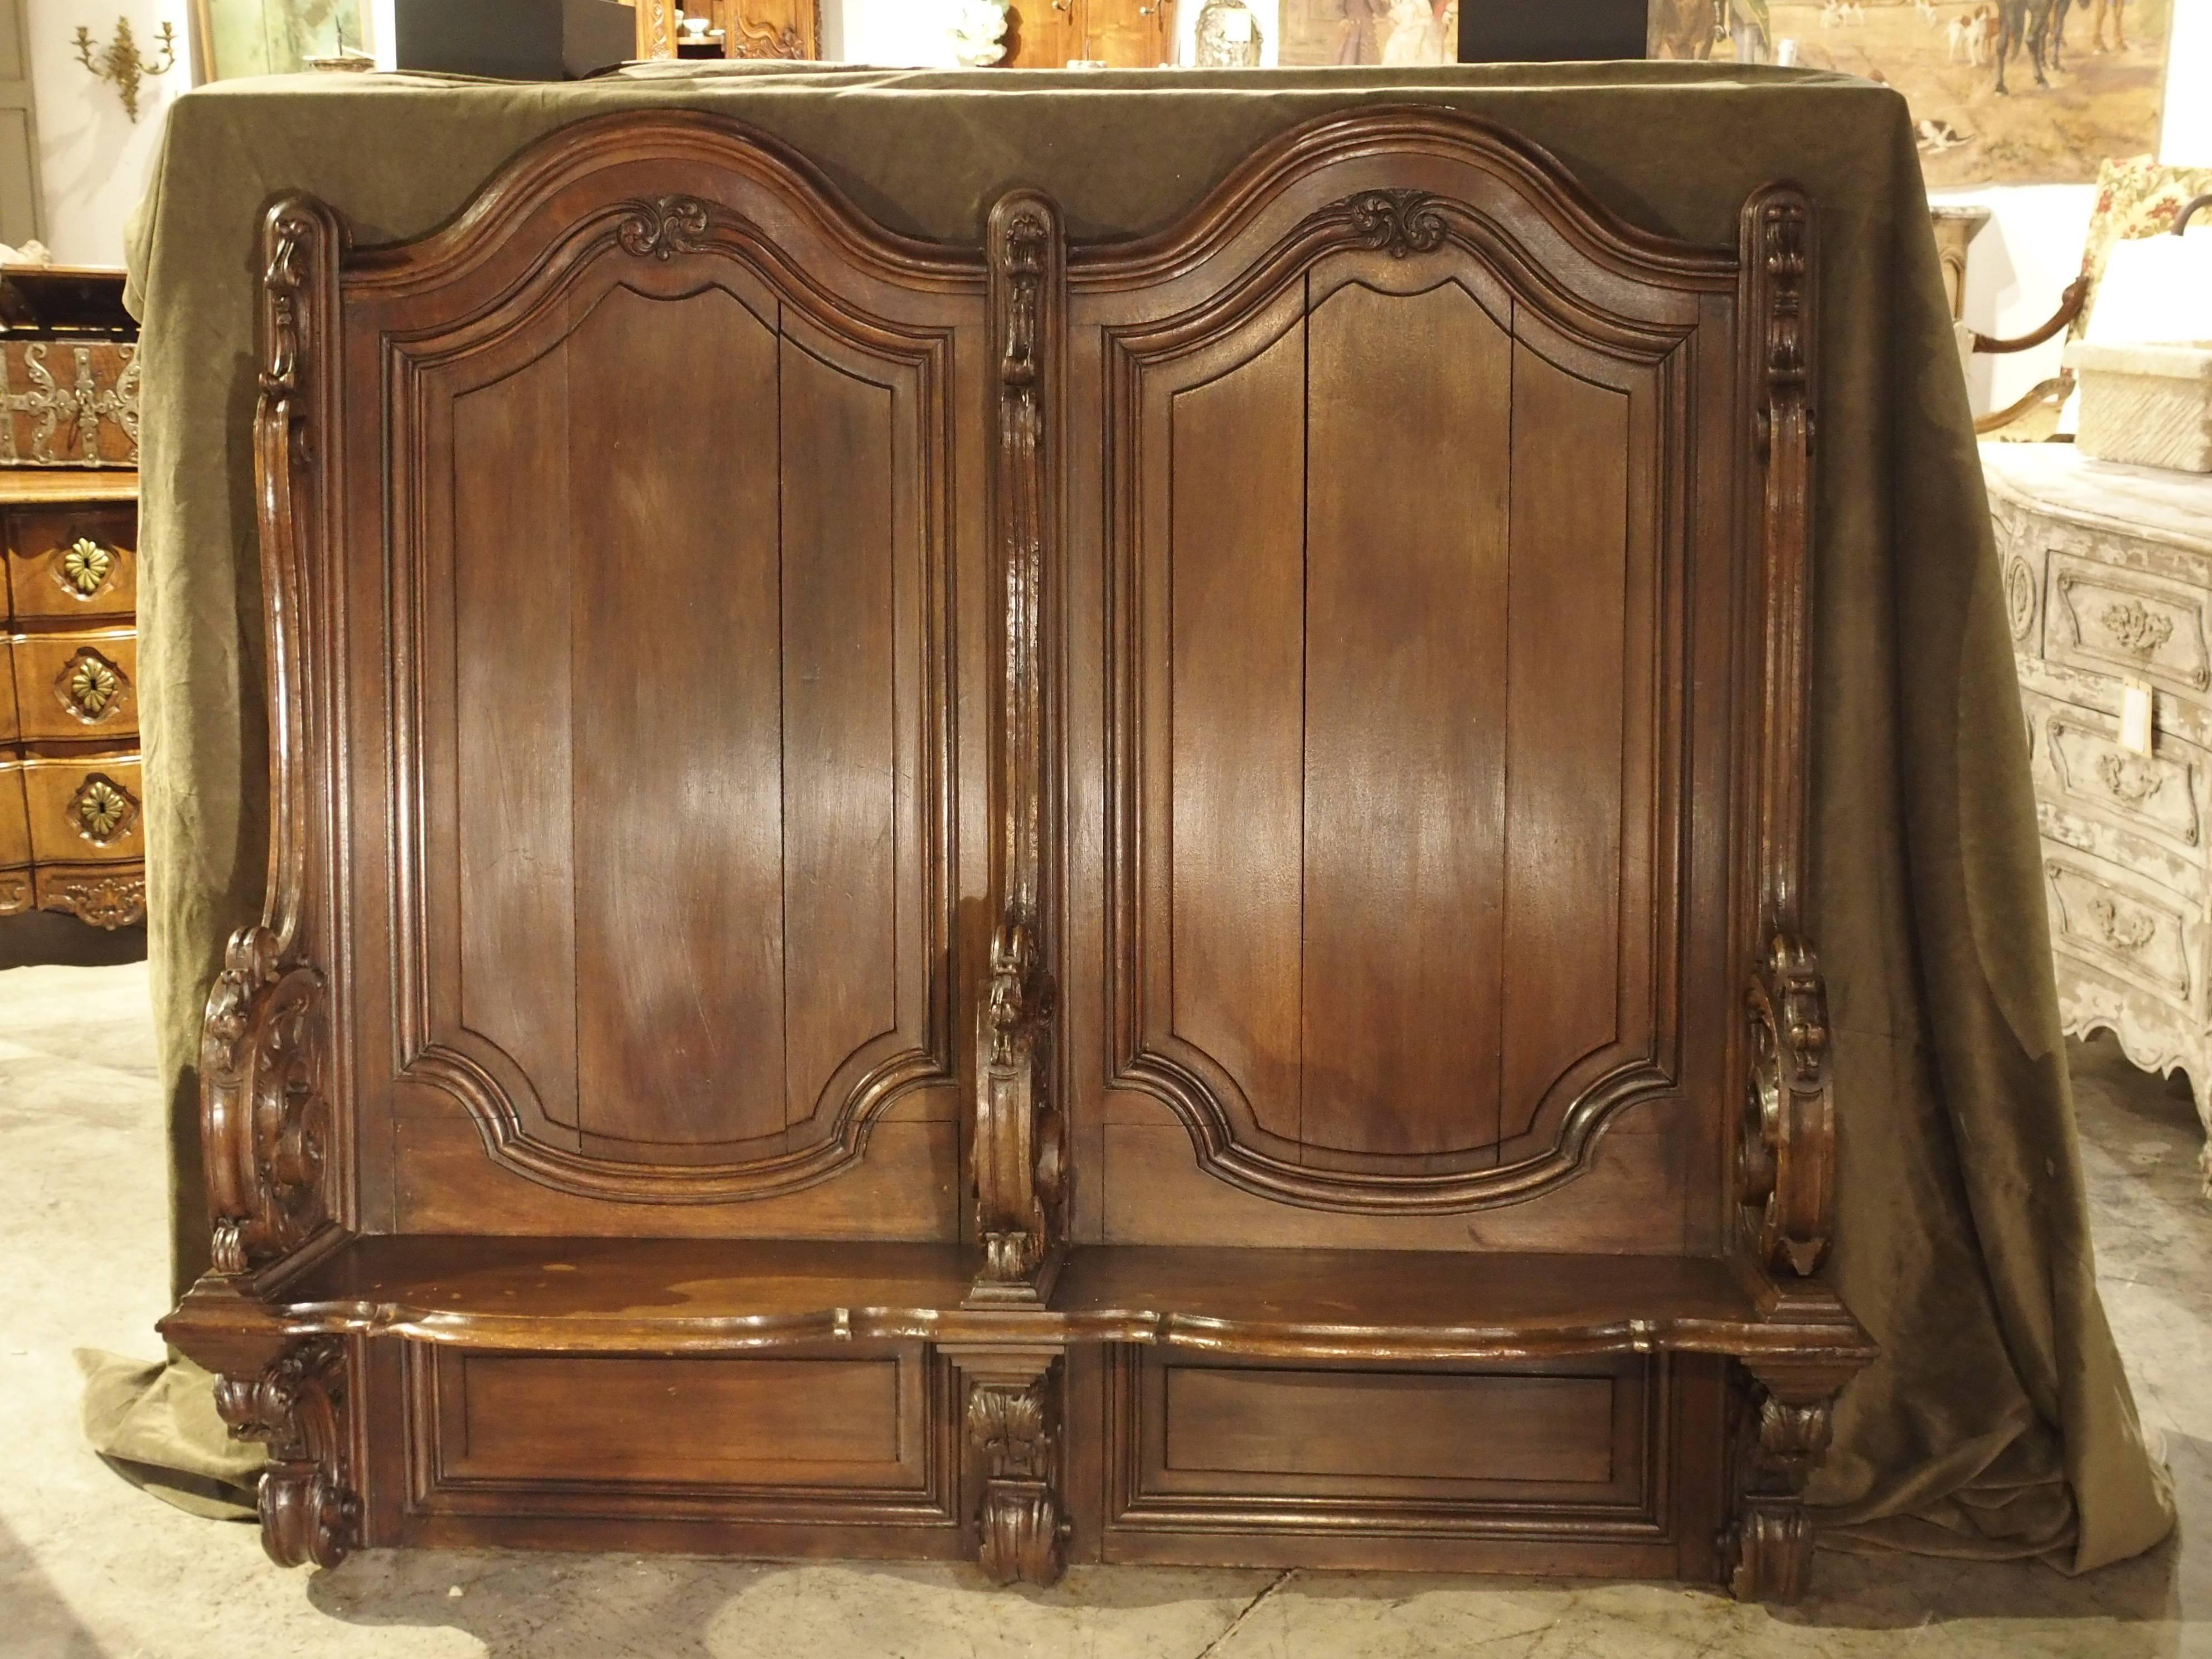 This European oak church stall came from a private chapel of a chateau in Liege, Belgium. This double stall would have been attached to the wall. We have a second stall that came from the same chapel (currently available), and these would have been